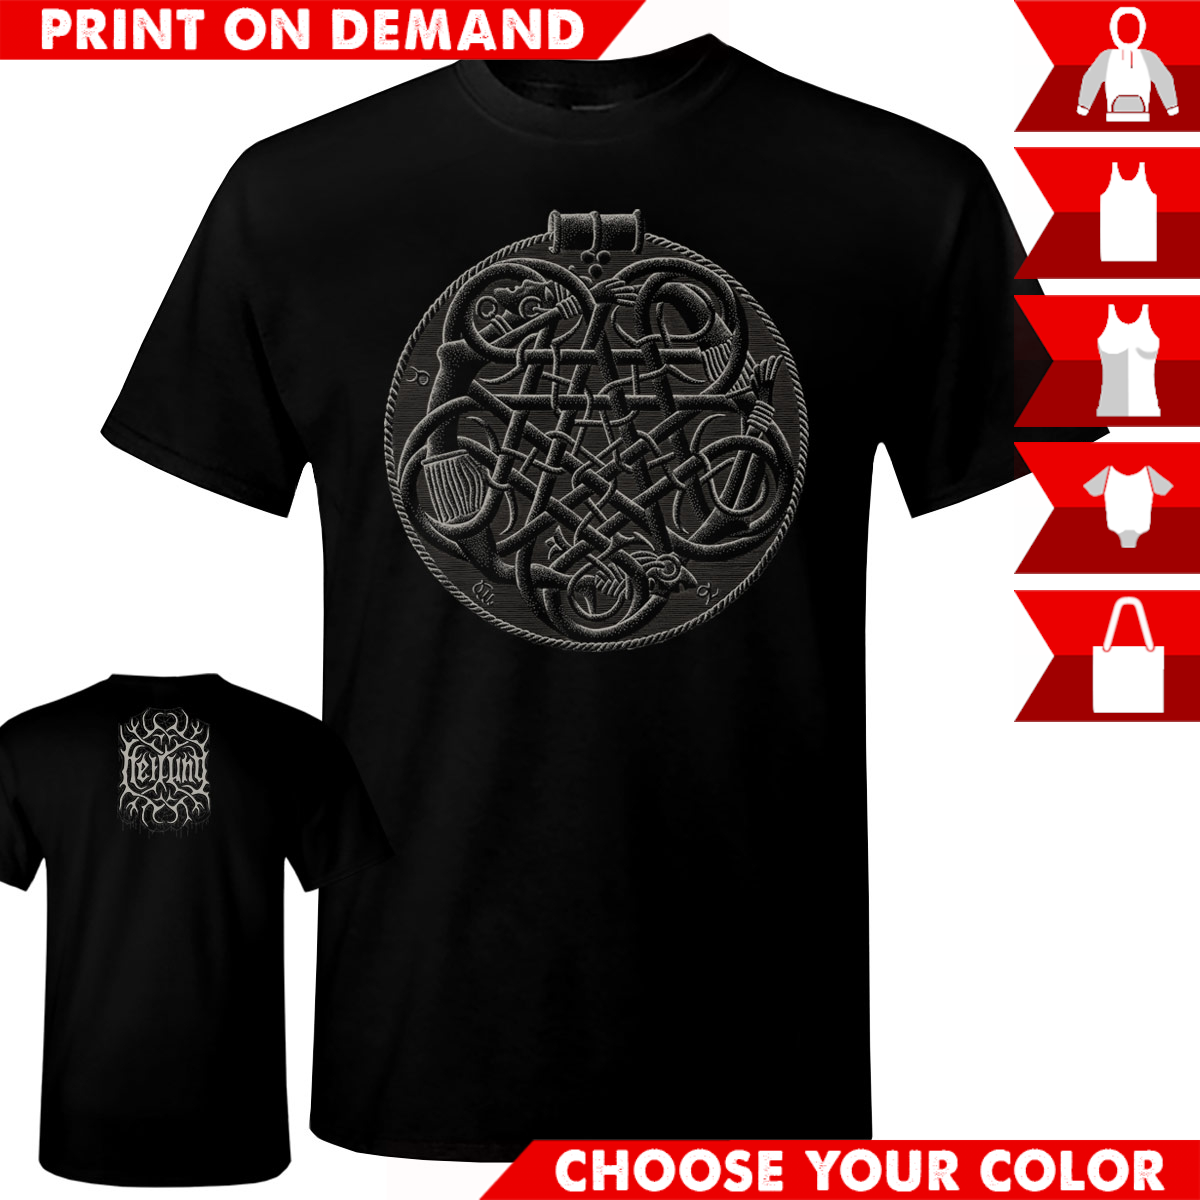 Ace Of Coins - Print on demand